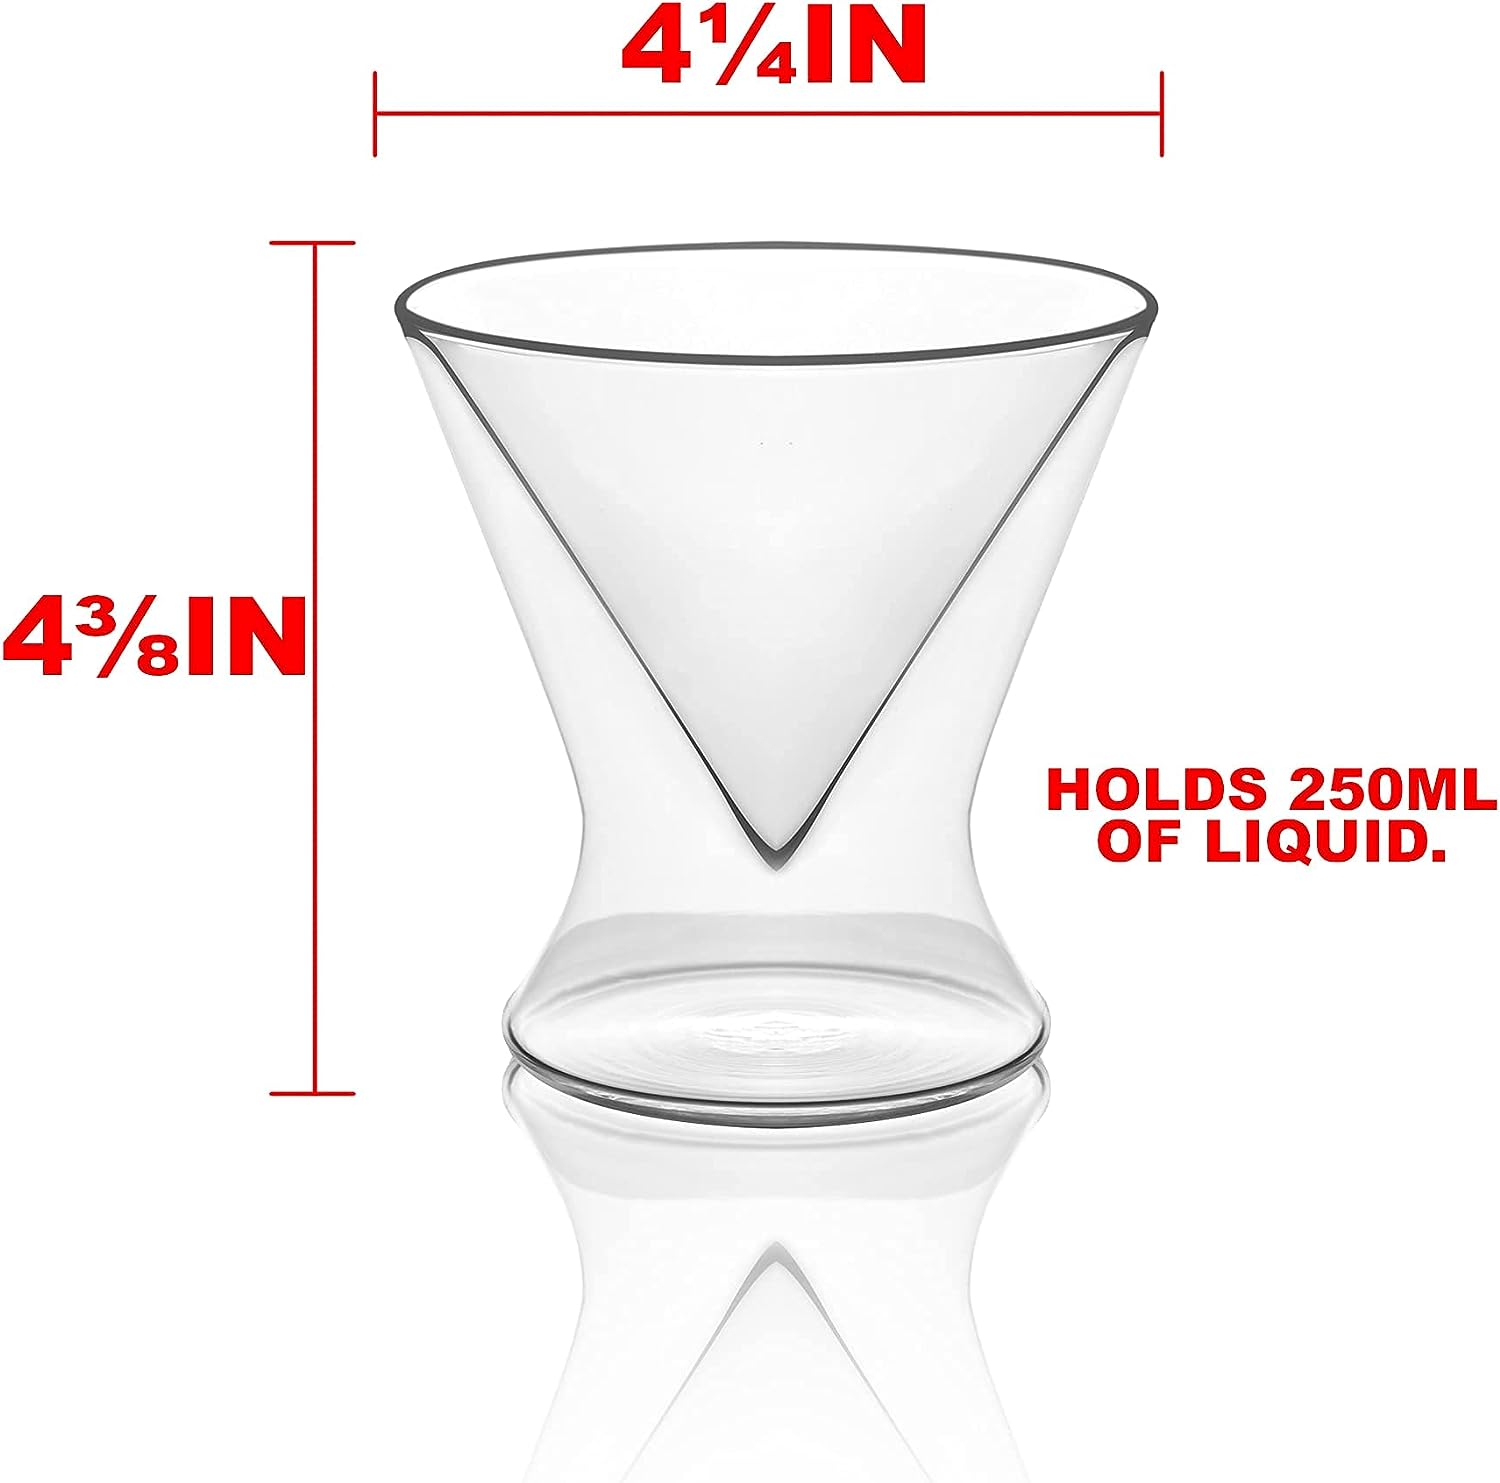 Double-Walled Stemless Martini Glass - Size - Holds 250ML of Liquid